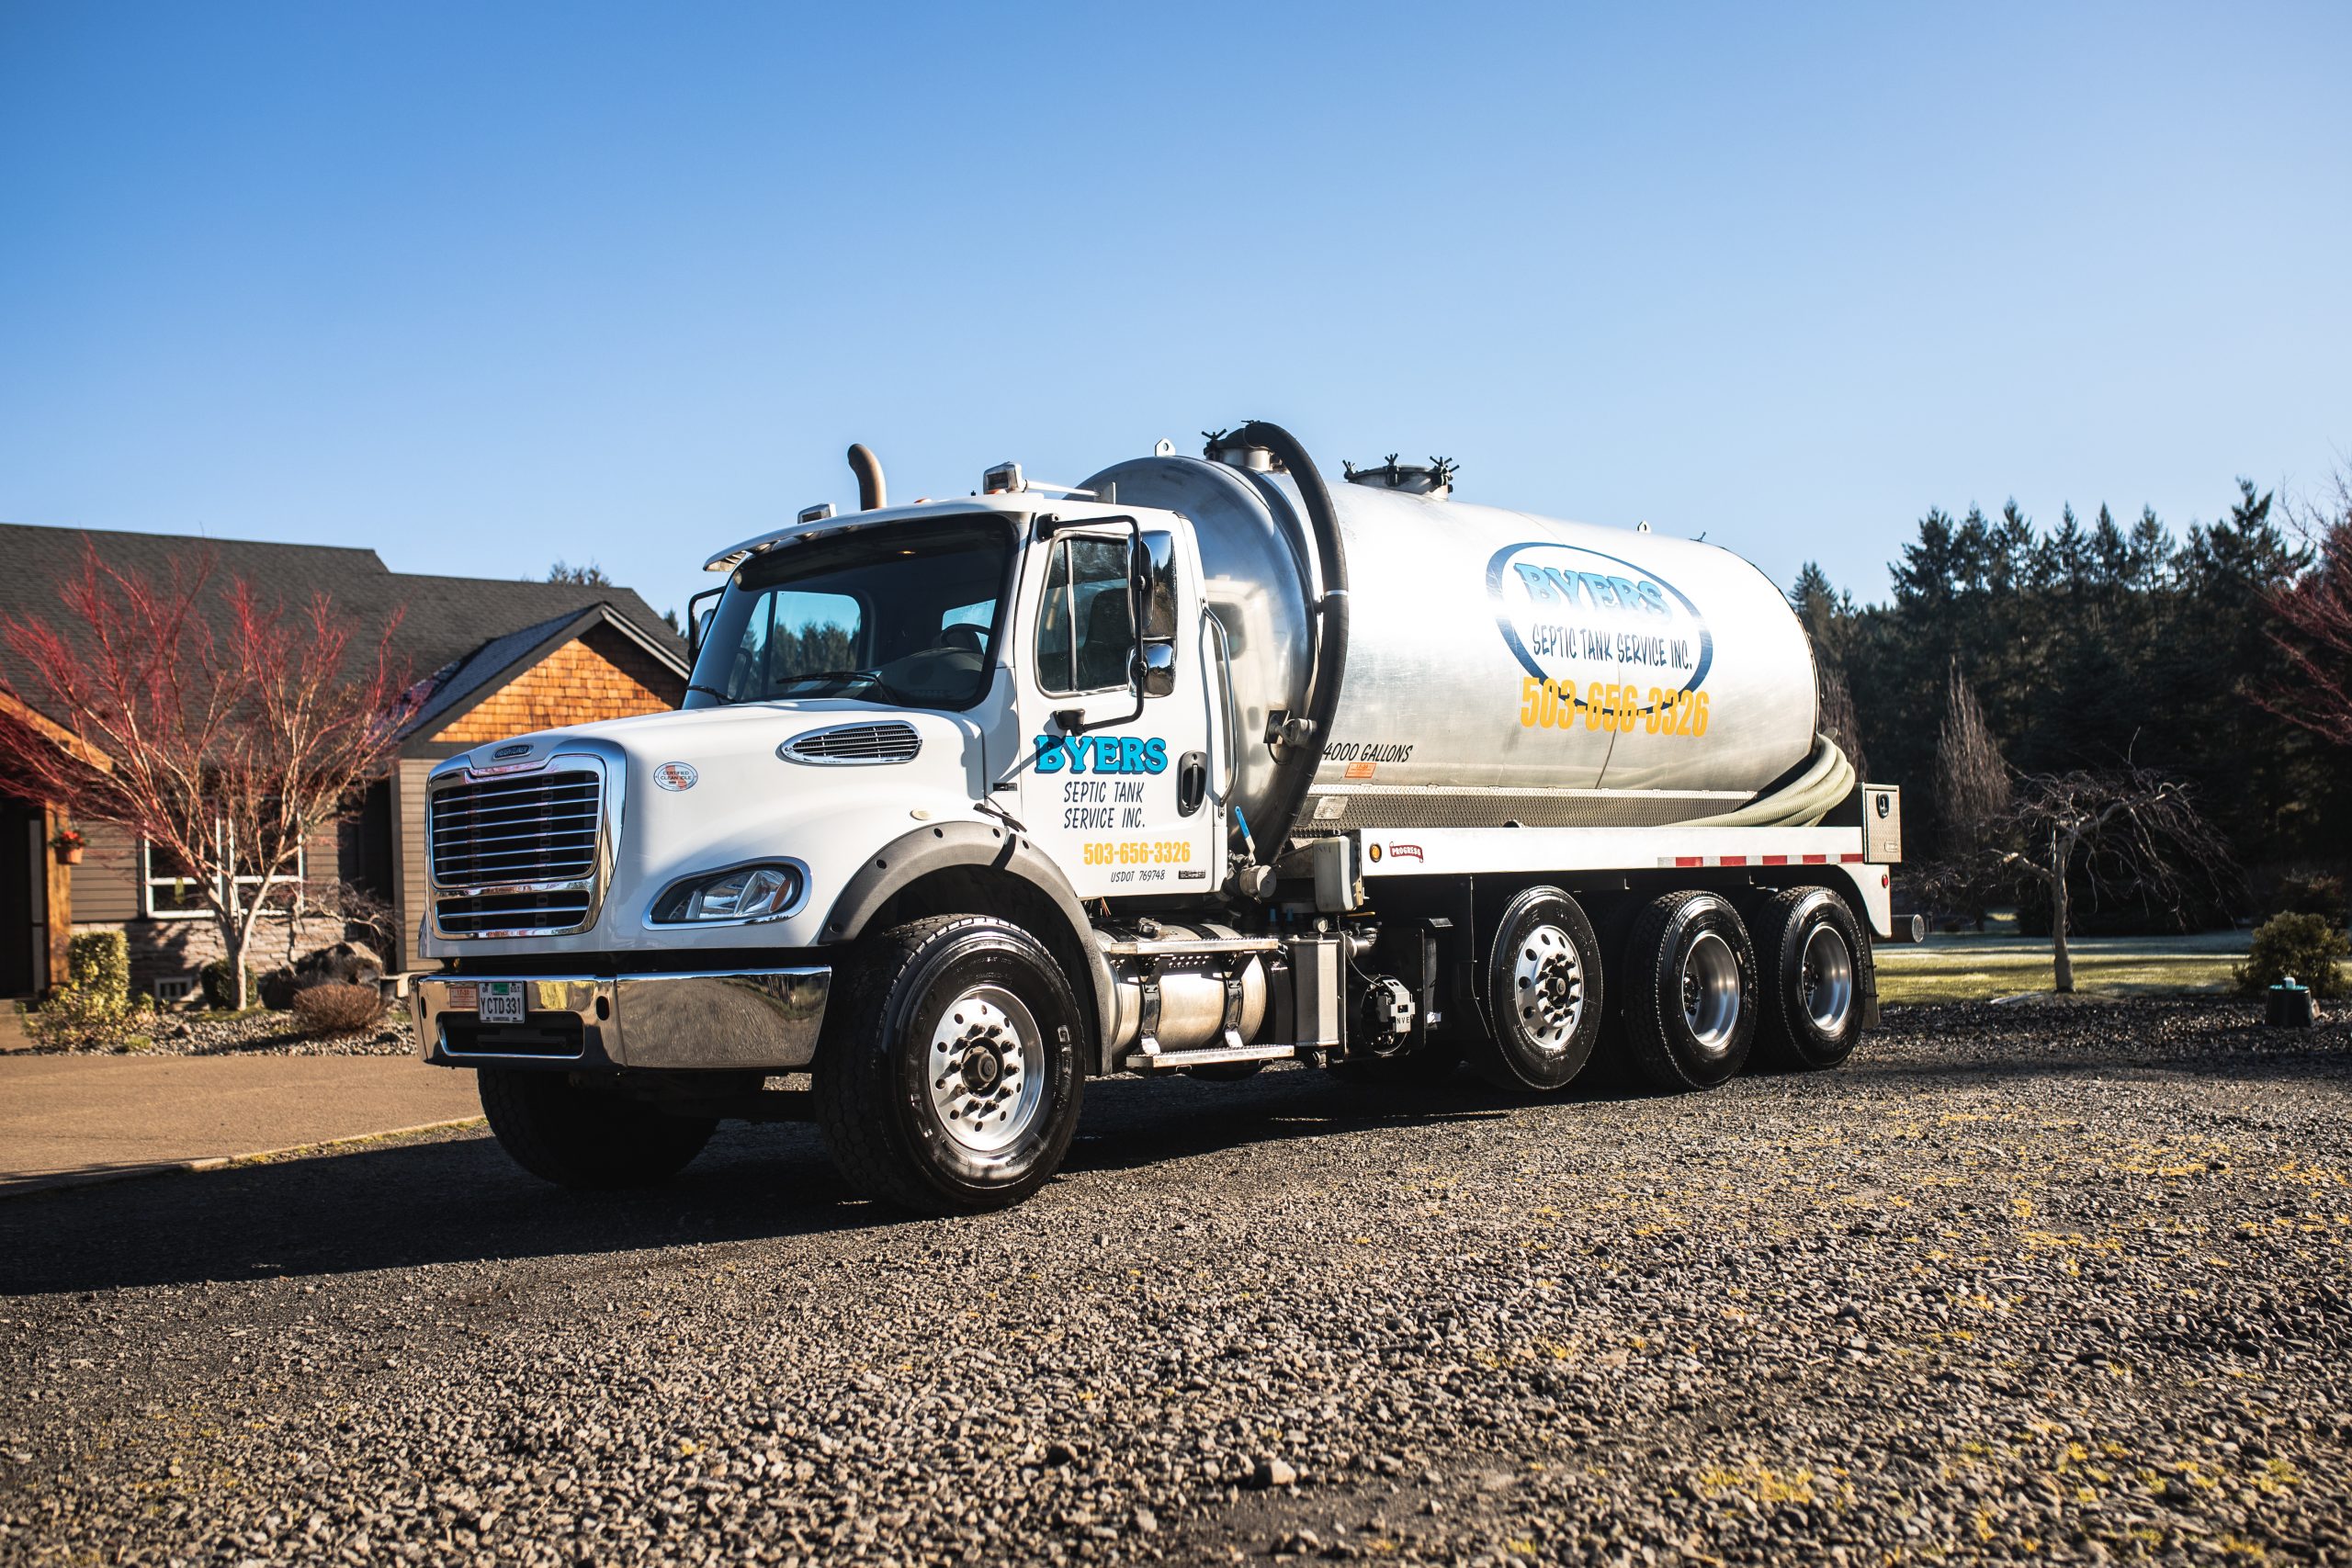 Image of Byers Oregon City Septic Tank Services at work